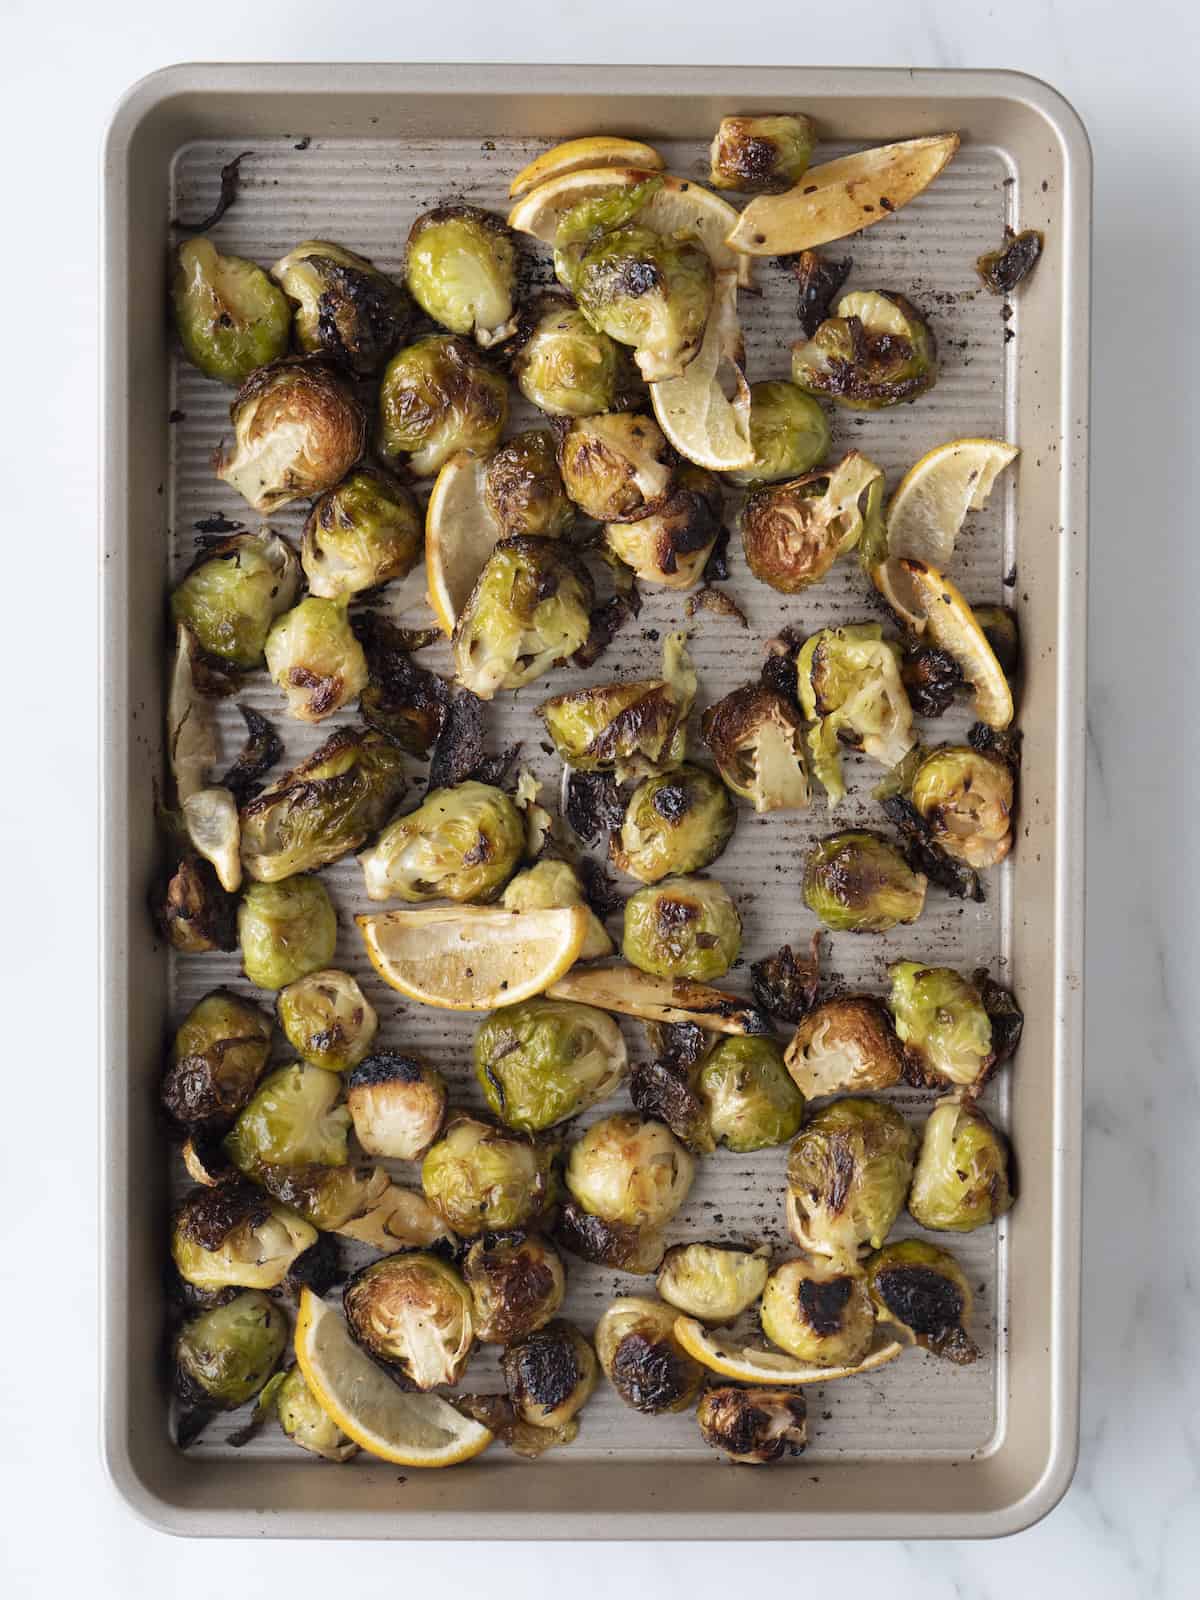 A sheet pan with brussels sprouts that have been roasted for 30 minutes, topped with lemon wedges whose juice has been squeezed into the brussels sprouts.